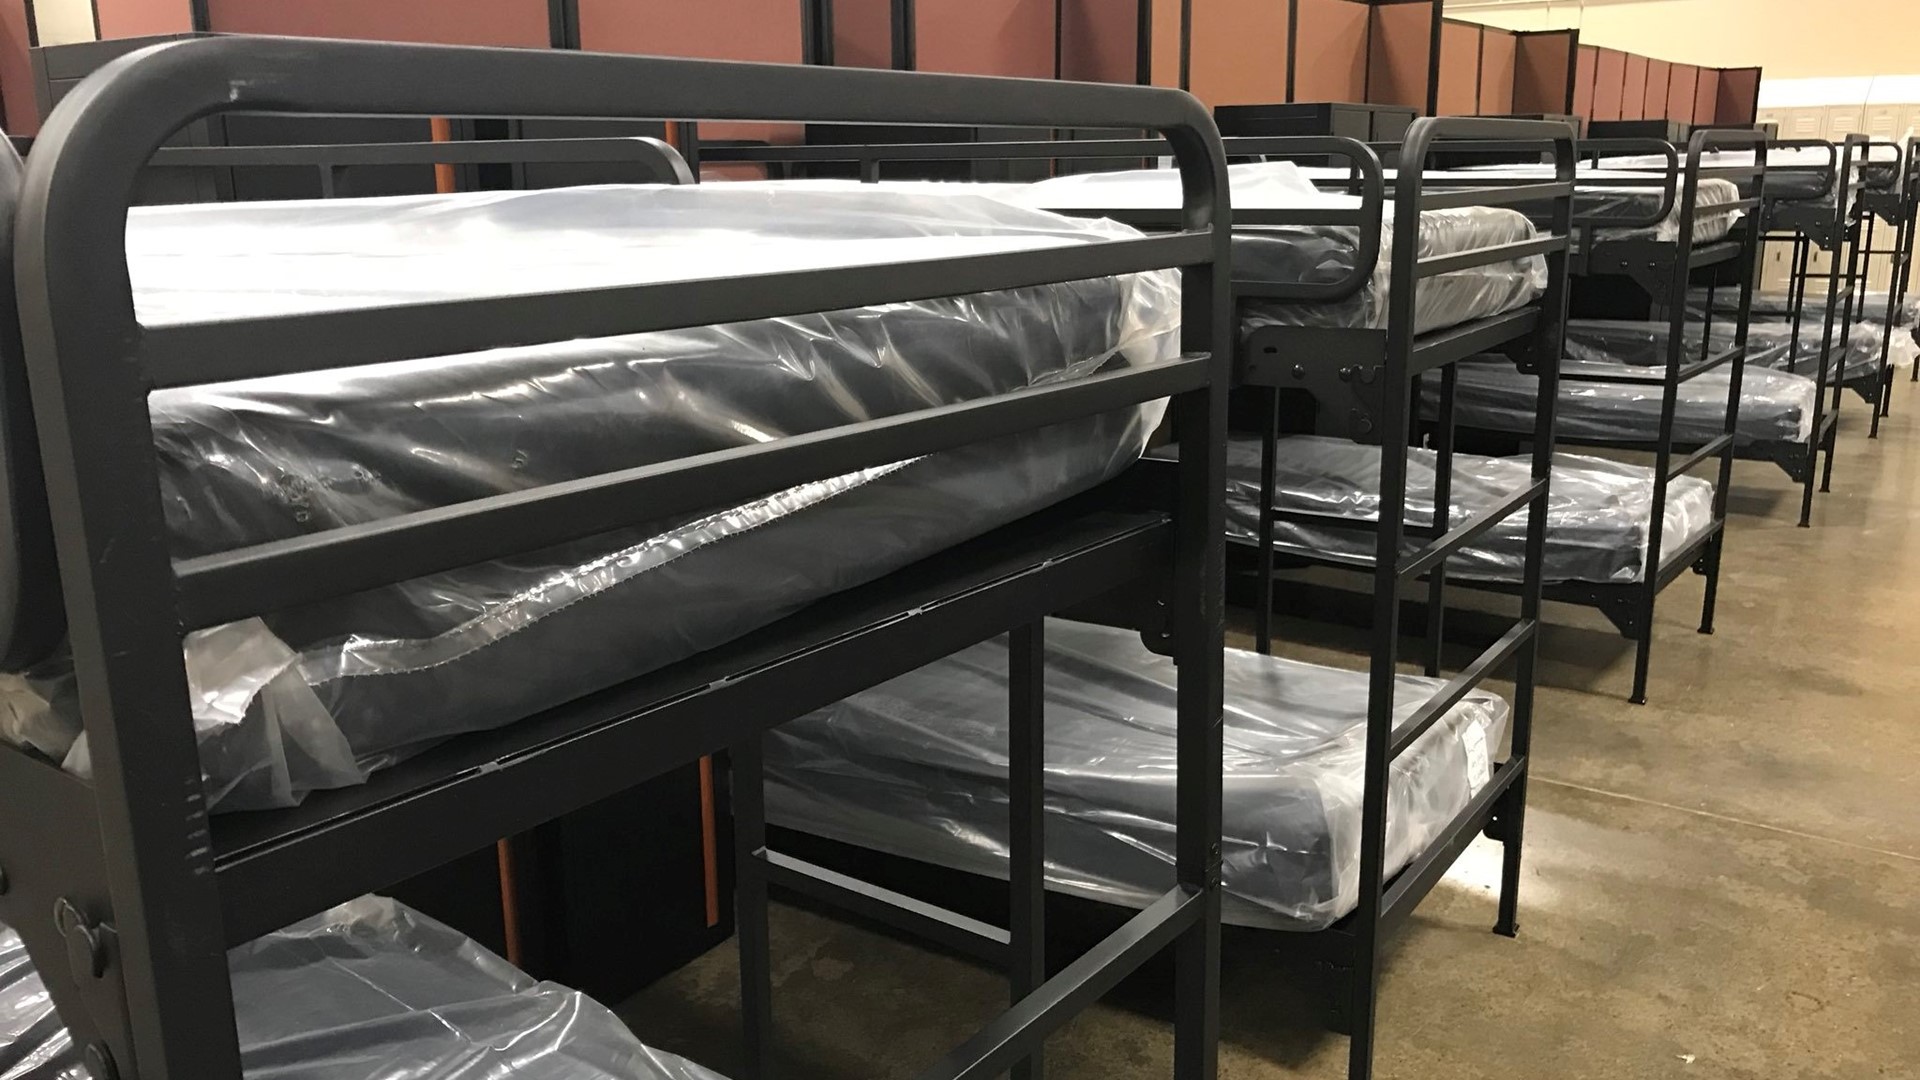 Stanislaus County is preparing to transition people living in a uniformed tent city underneath the 9th Street bridge into a new indoor shelter.